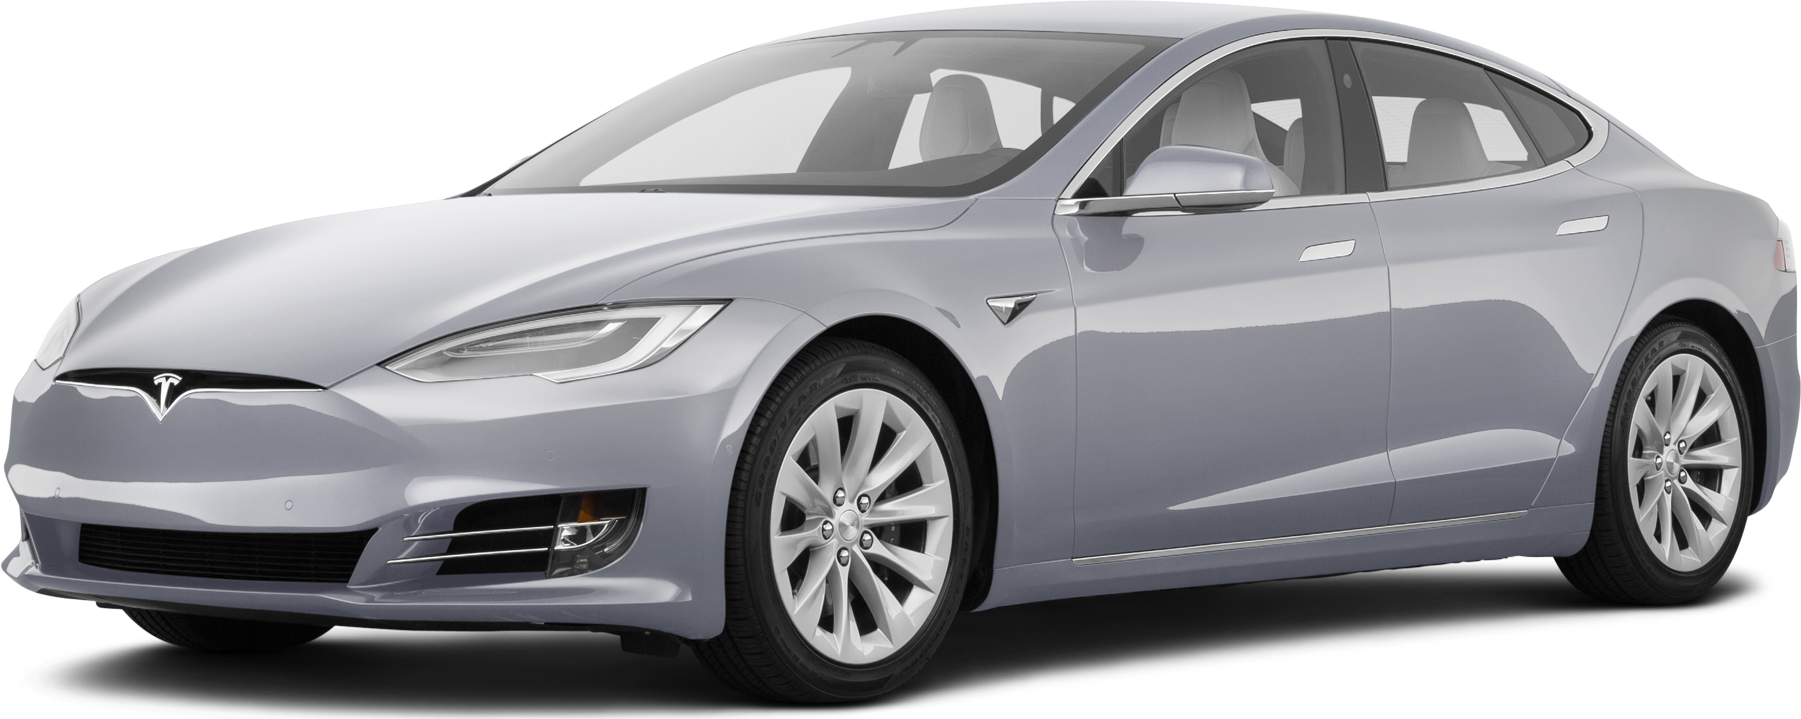 2018 Tesla Model S Price Value Ratings And Reviews Kelley Blue Book 